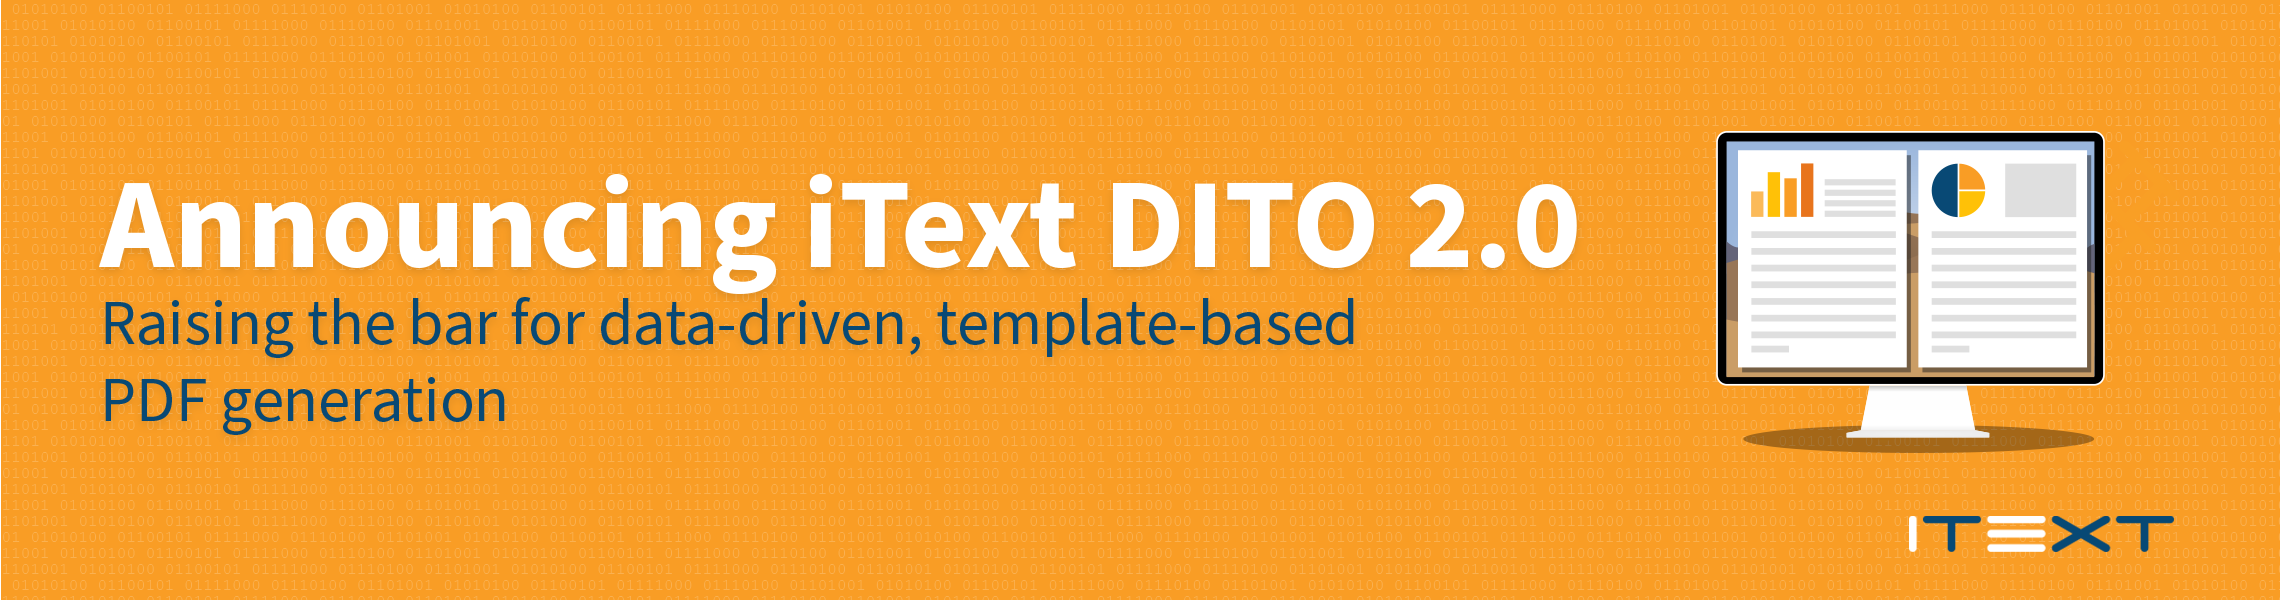 Announcing iText DITO 2.0